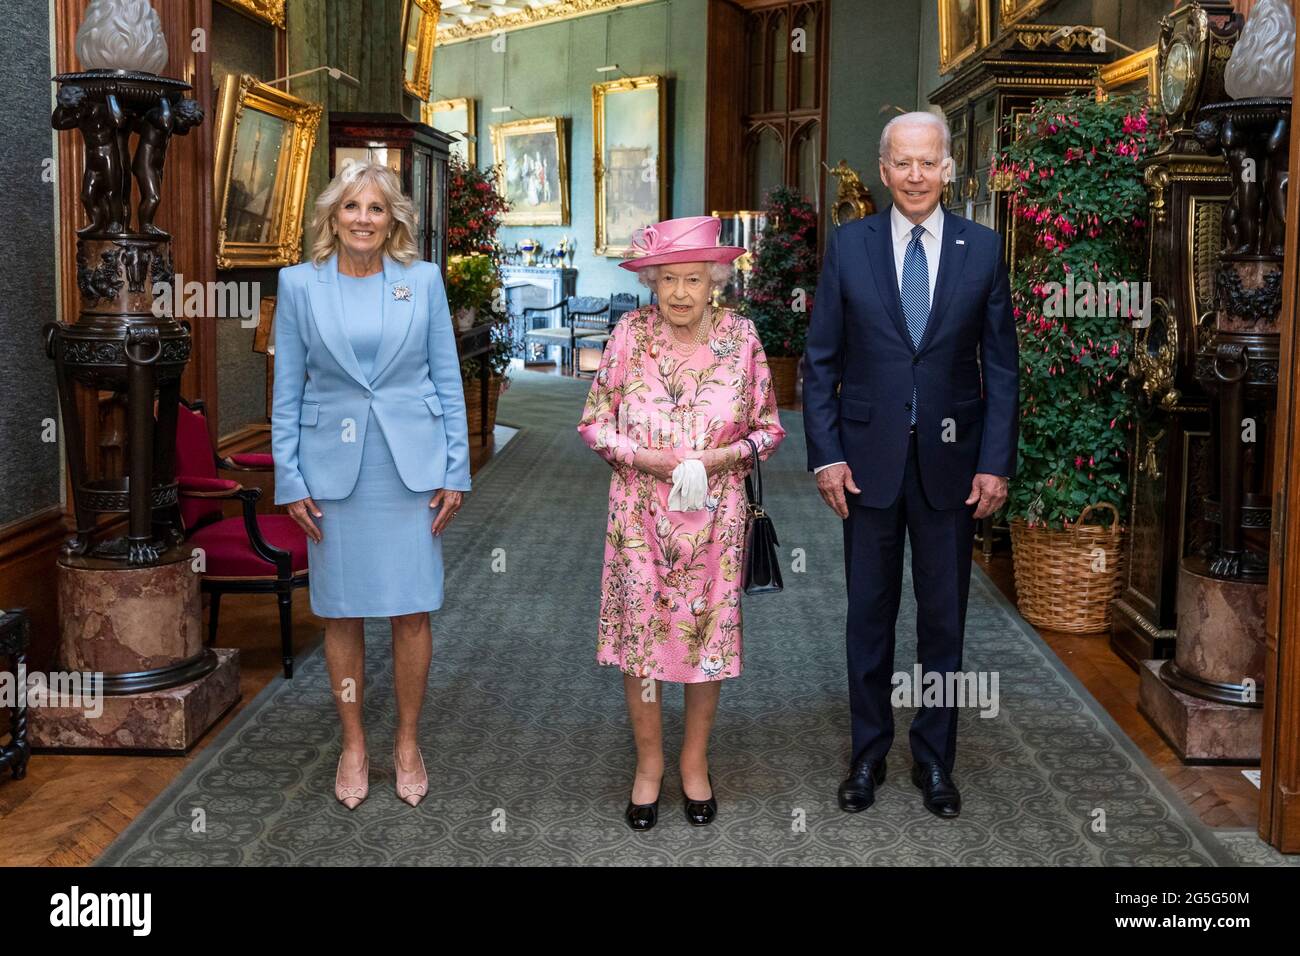 U.S President Joe Biden and First Lady Jill Biden pose for an official photo with Queen Elizabeth II in the Grand Corridor of Windsor Castle June 13, 2021 in Windsor, England, United Kingdom. Stock Photo